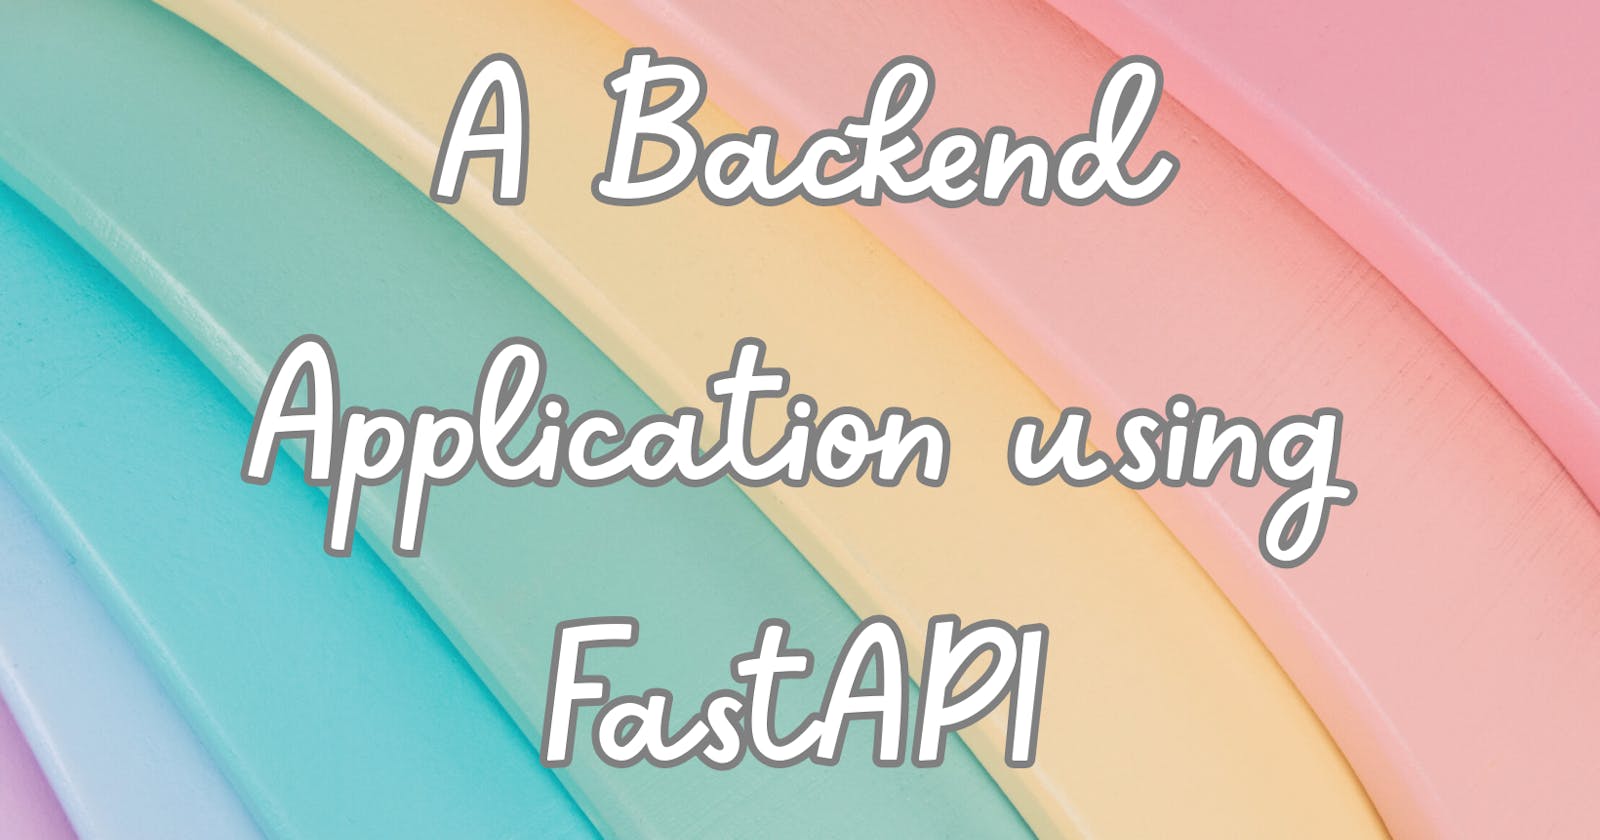 FastAPI Made Easy: A Step-by-Step Tutorial for Beginners